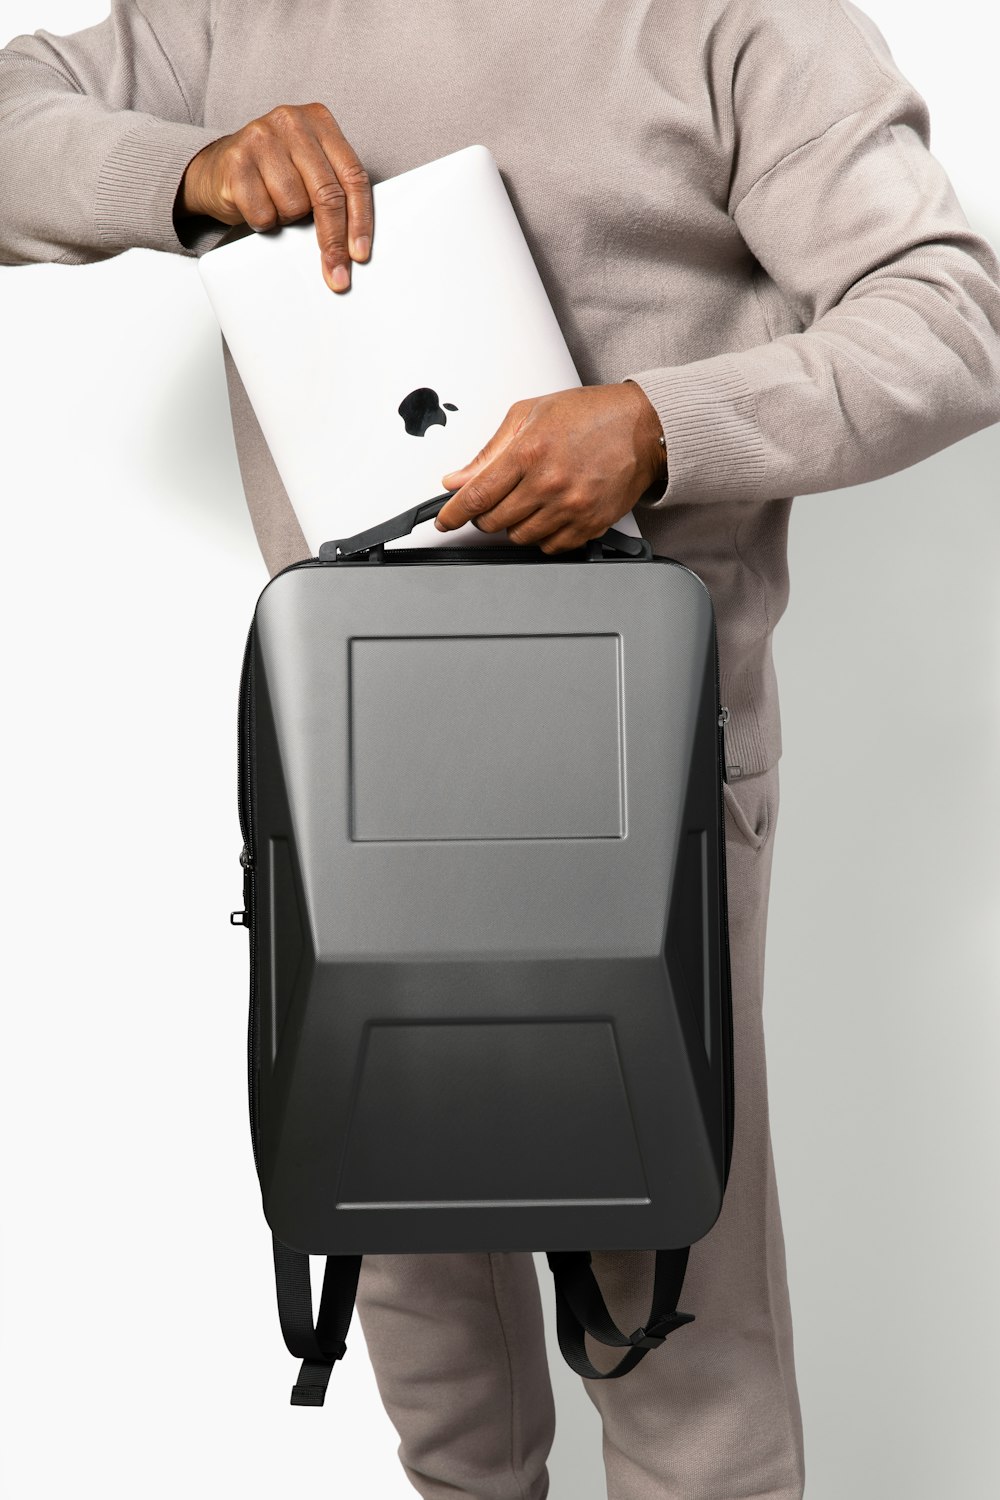 a man holding a laptop and a briefcase